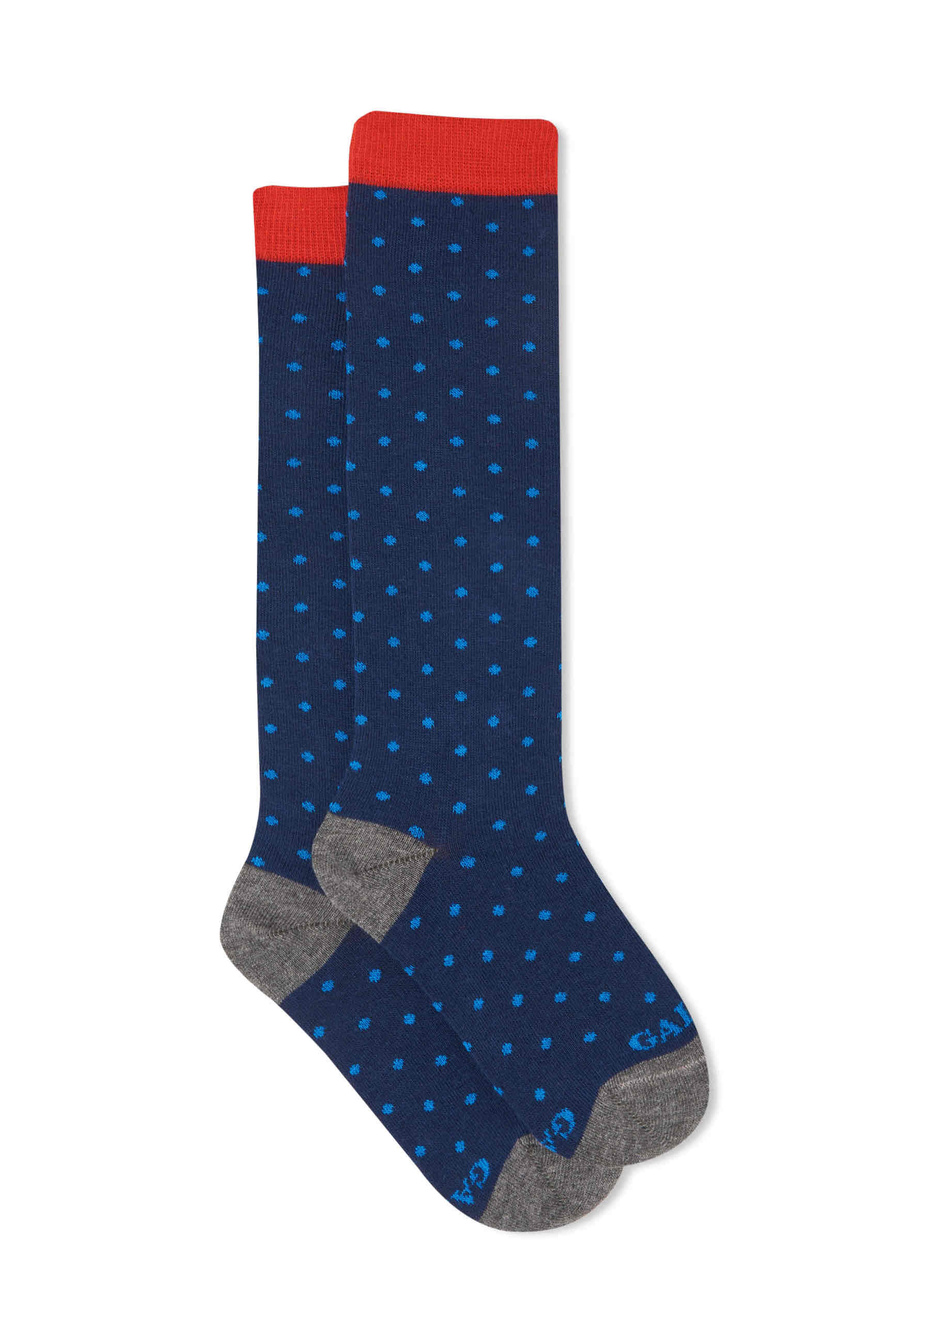 Kids' long royal cotton socks with polka dots - Gallo 1927 - Official Online Shop